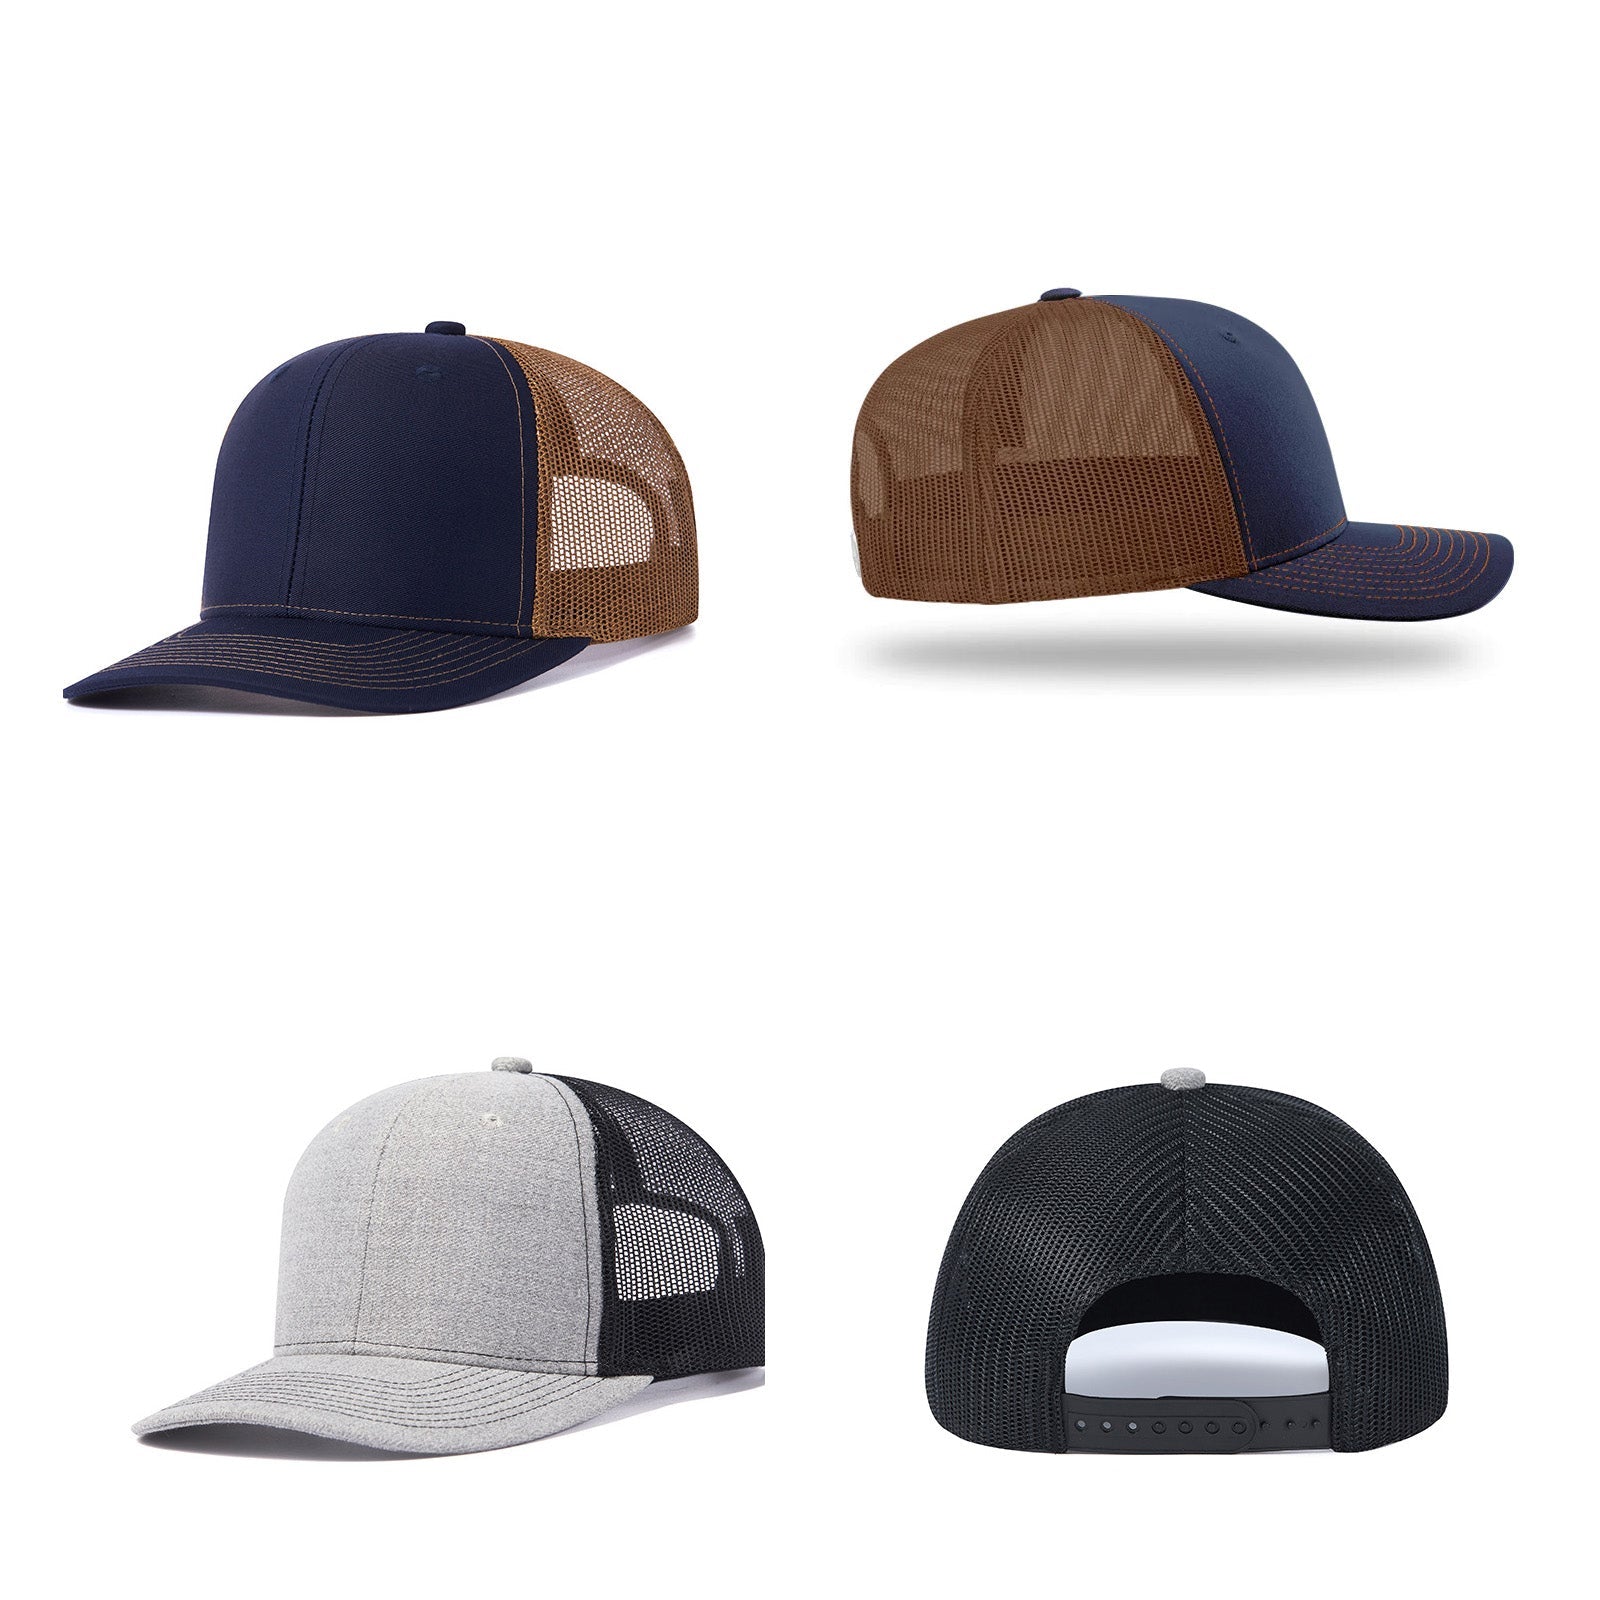 The image displays four "2 pcs Adjustable Mesh Trucker Hat with 4pcs Cap Stickers for Engraving" by CrealityFalcon. The first cap (top left) has a blue front and brown mesh back, perfect as a trucker hat. The second cap (top right) shows its left side with the same colors. The third cap (bottom left) is gray with a black mesh back. The fourth cap (bottom right) shows the back with a black mesh and adjustable strap—an impressive collection from CrealityFalcon.
